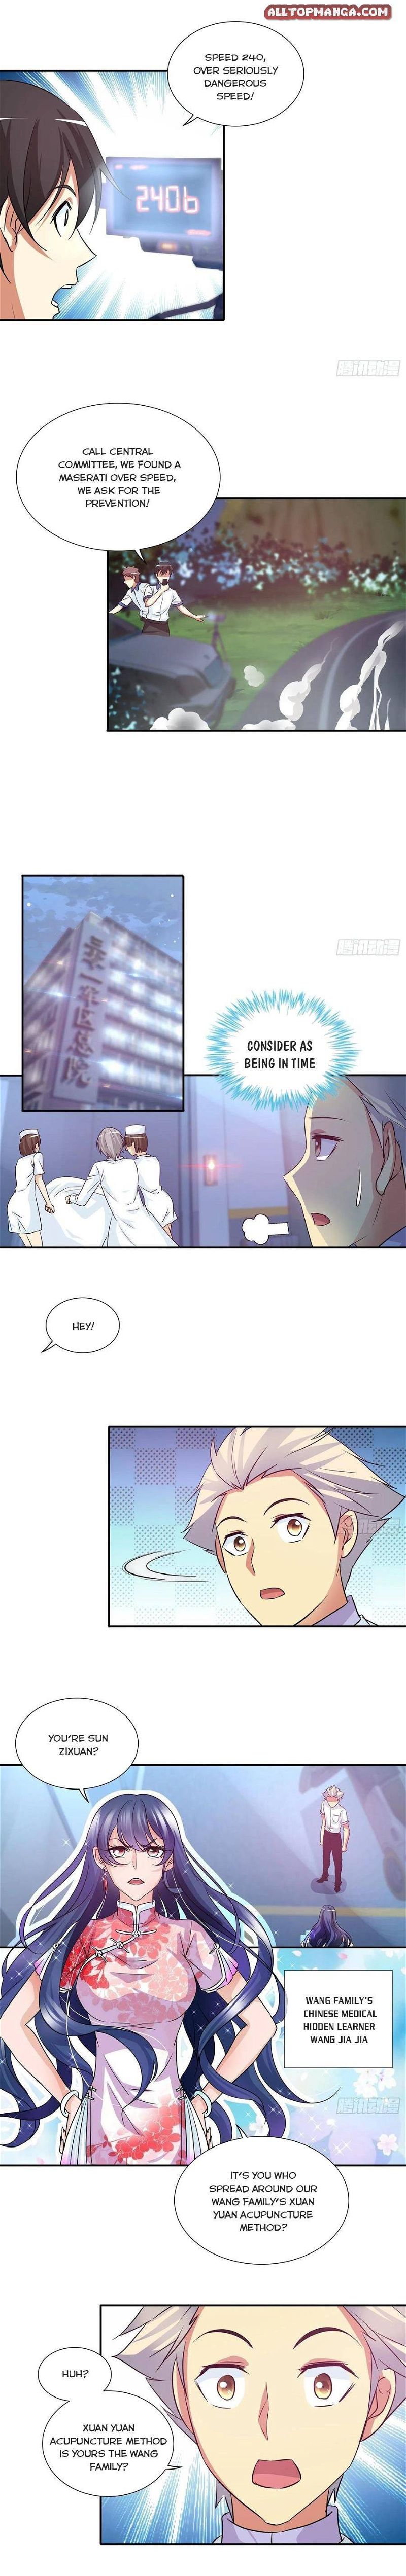 I Am A God Of Medicine Chapter 86 page 3